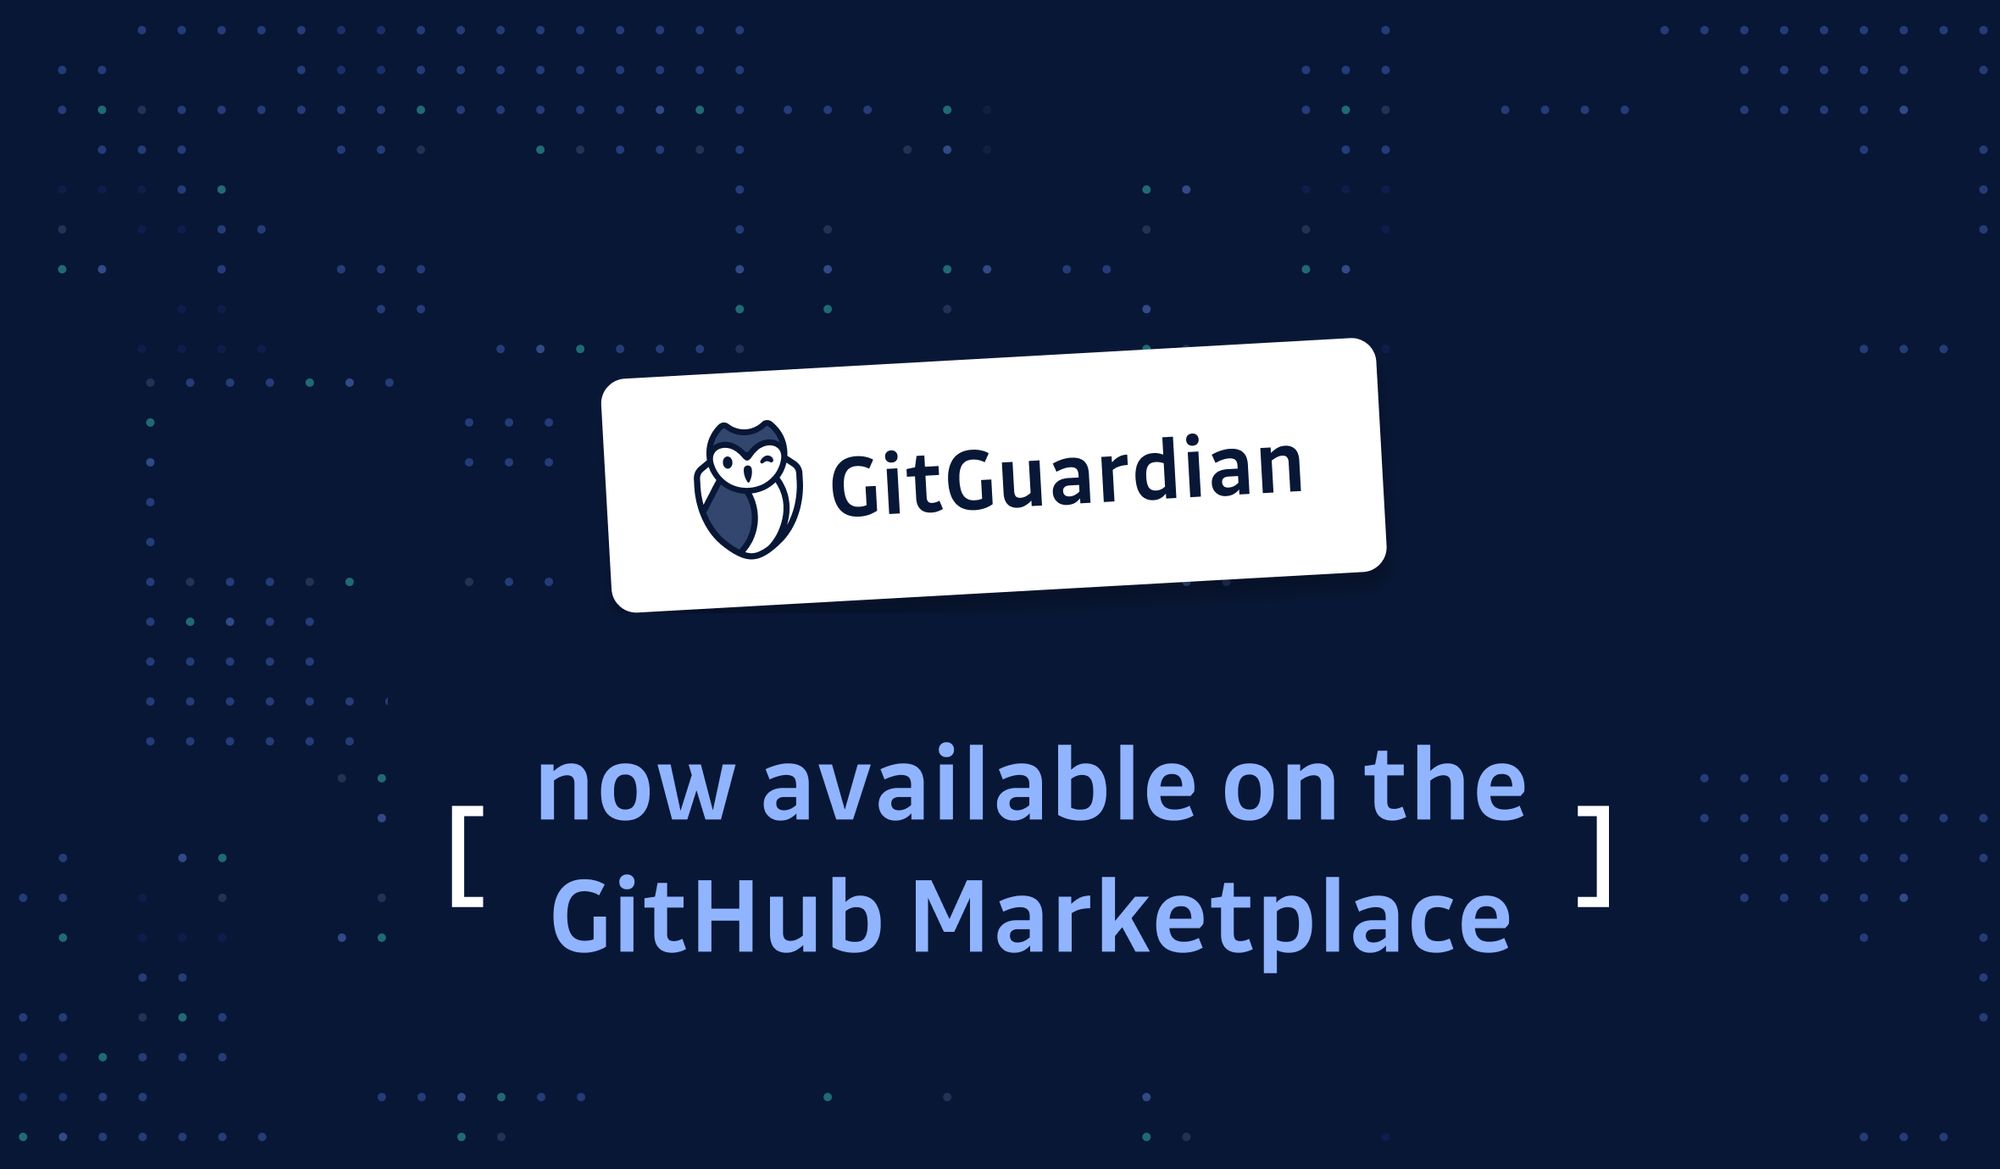 GitGuardian Now Available on the GitHub Marketplace (and already the #1 ranking app in the Security Category)